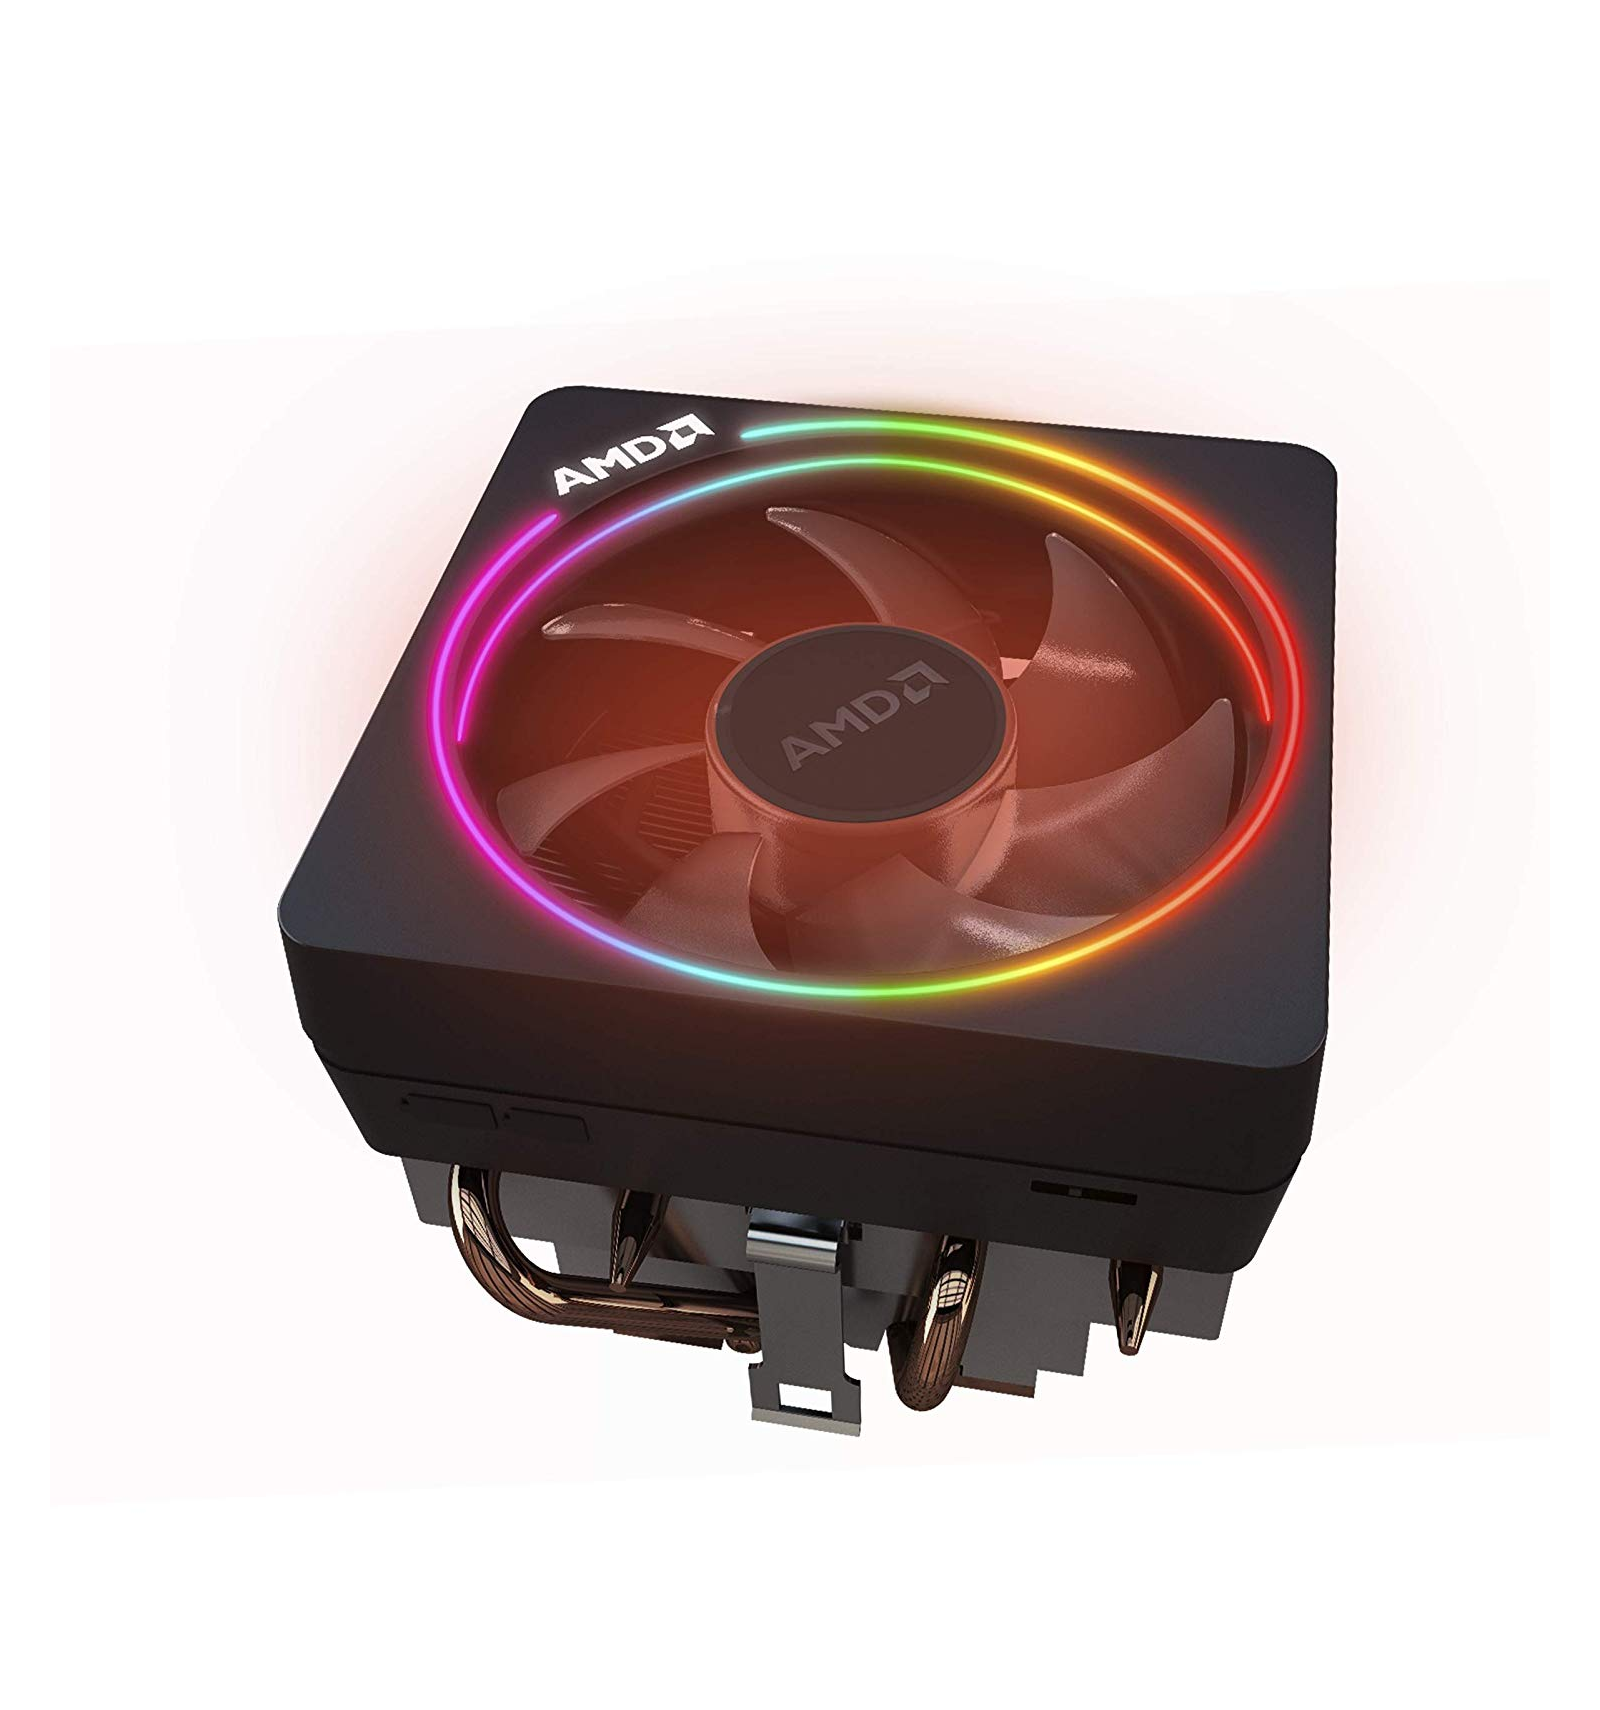 ACPU MD Ryzen 3700X Box AM4 (3,600GHz) with Wraith Spire cooler with RGB  LED DaxStore